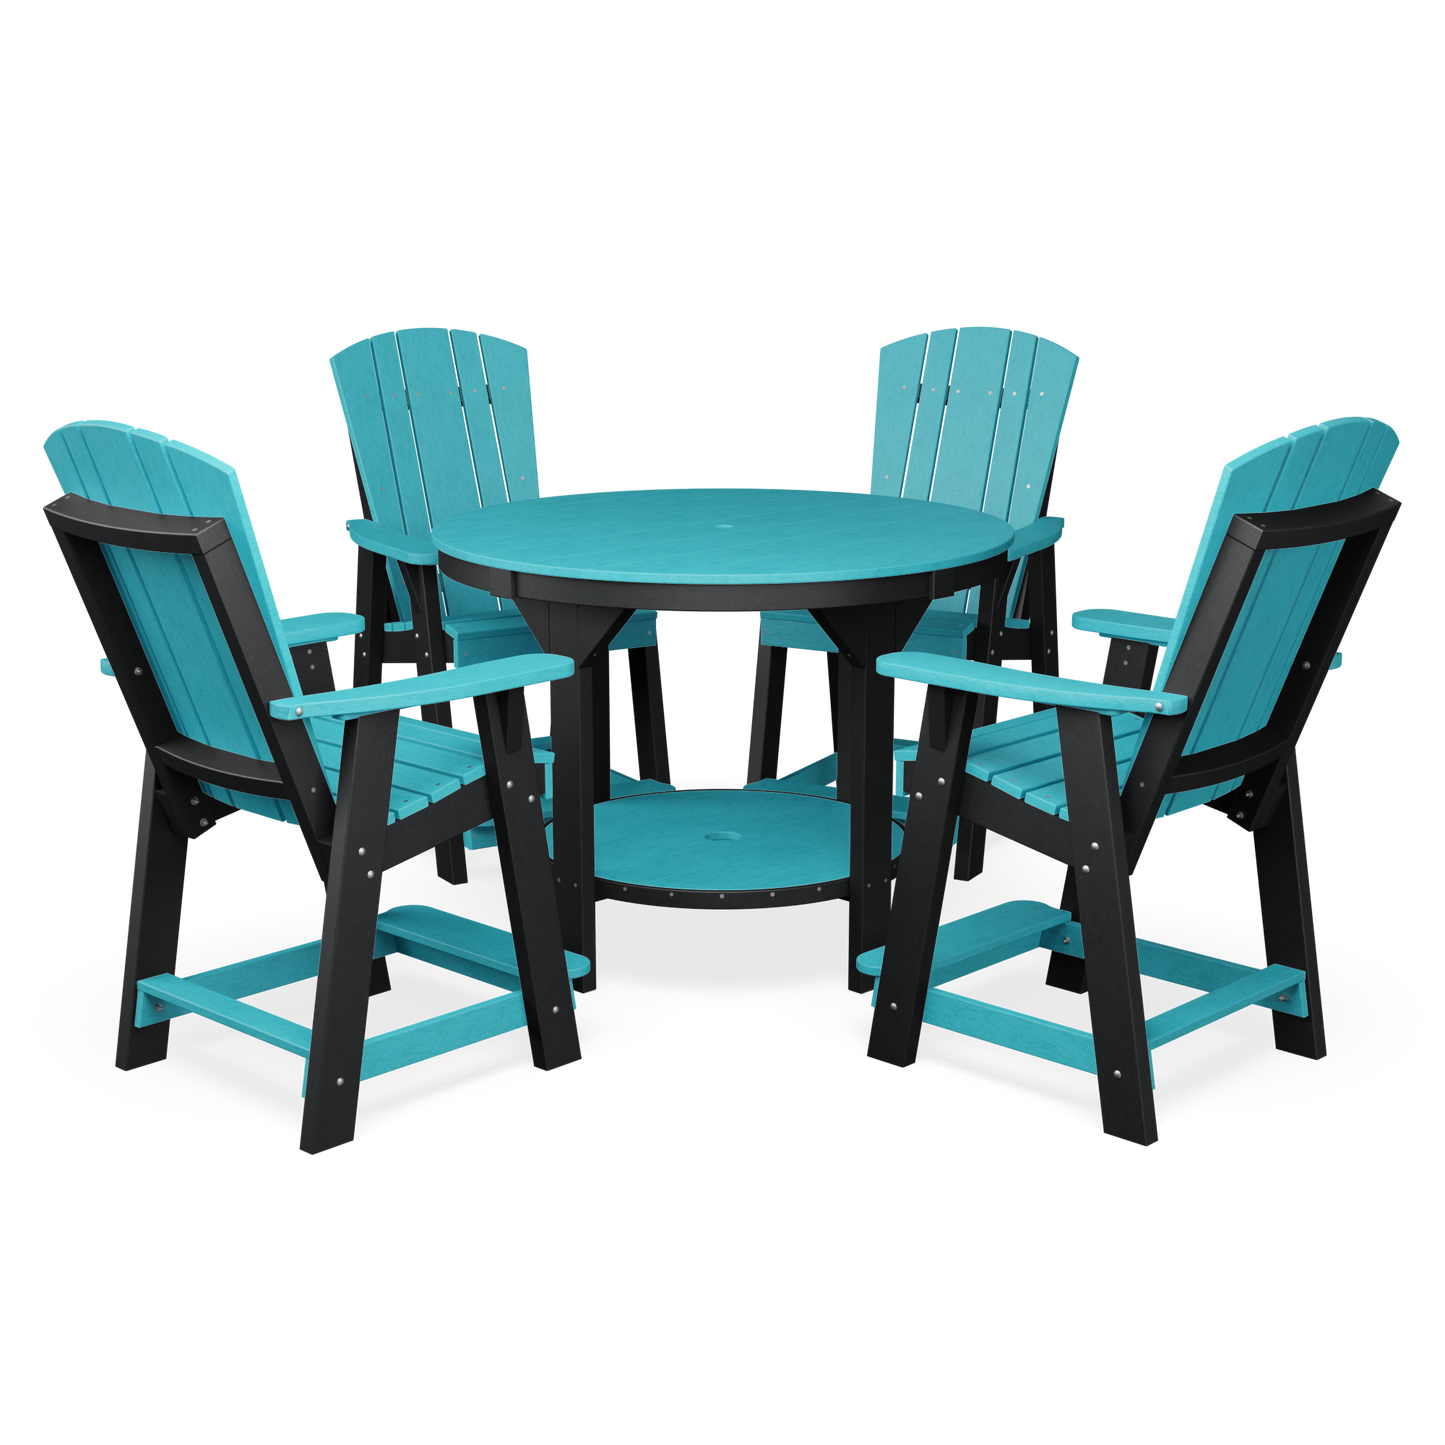 Wildridge Recycled Plastic Heritage 5 Piece 48" Pub Table Set with 4 Balcony Chairs (Counter Height ) - LEAD TIME TO SHIP 6 WEEKS OR LESS